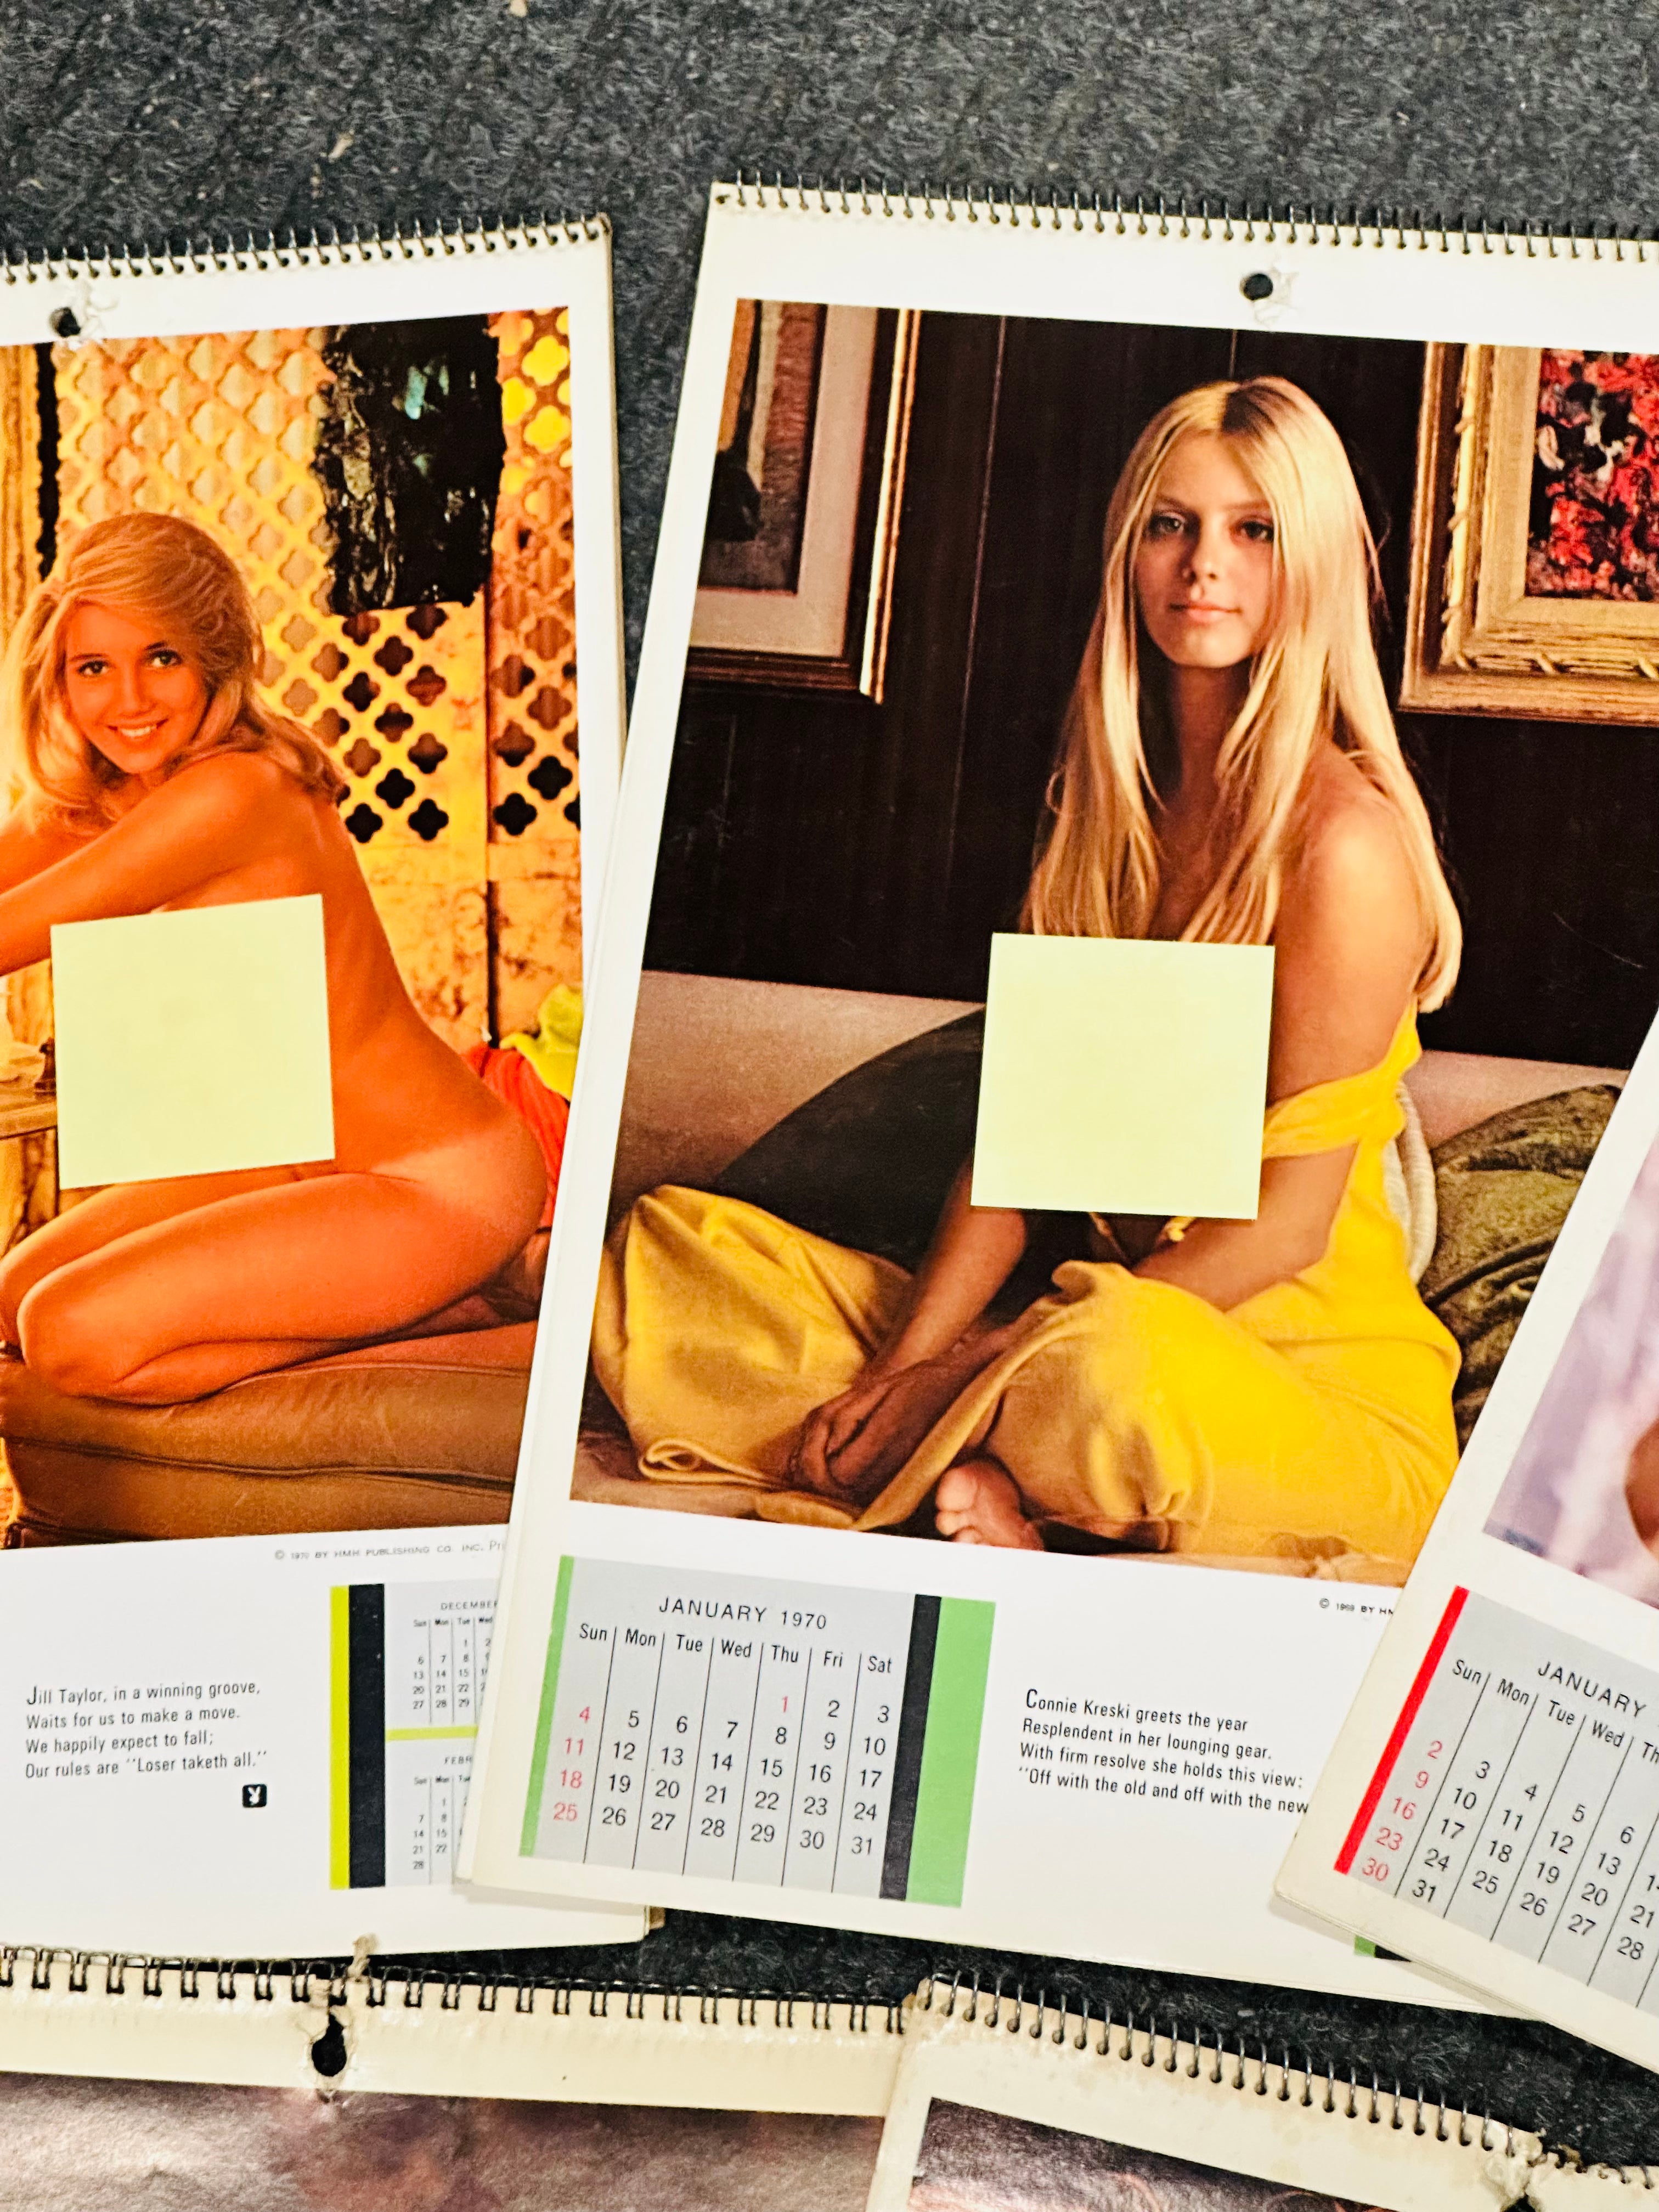 Playboy Calendars 8 complete lot deal 1960s and 70s